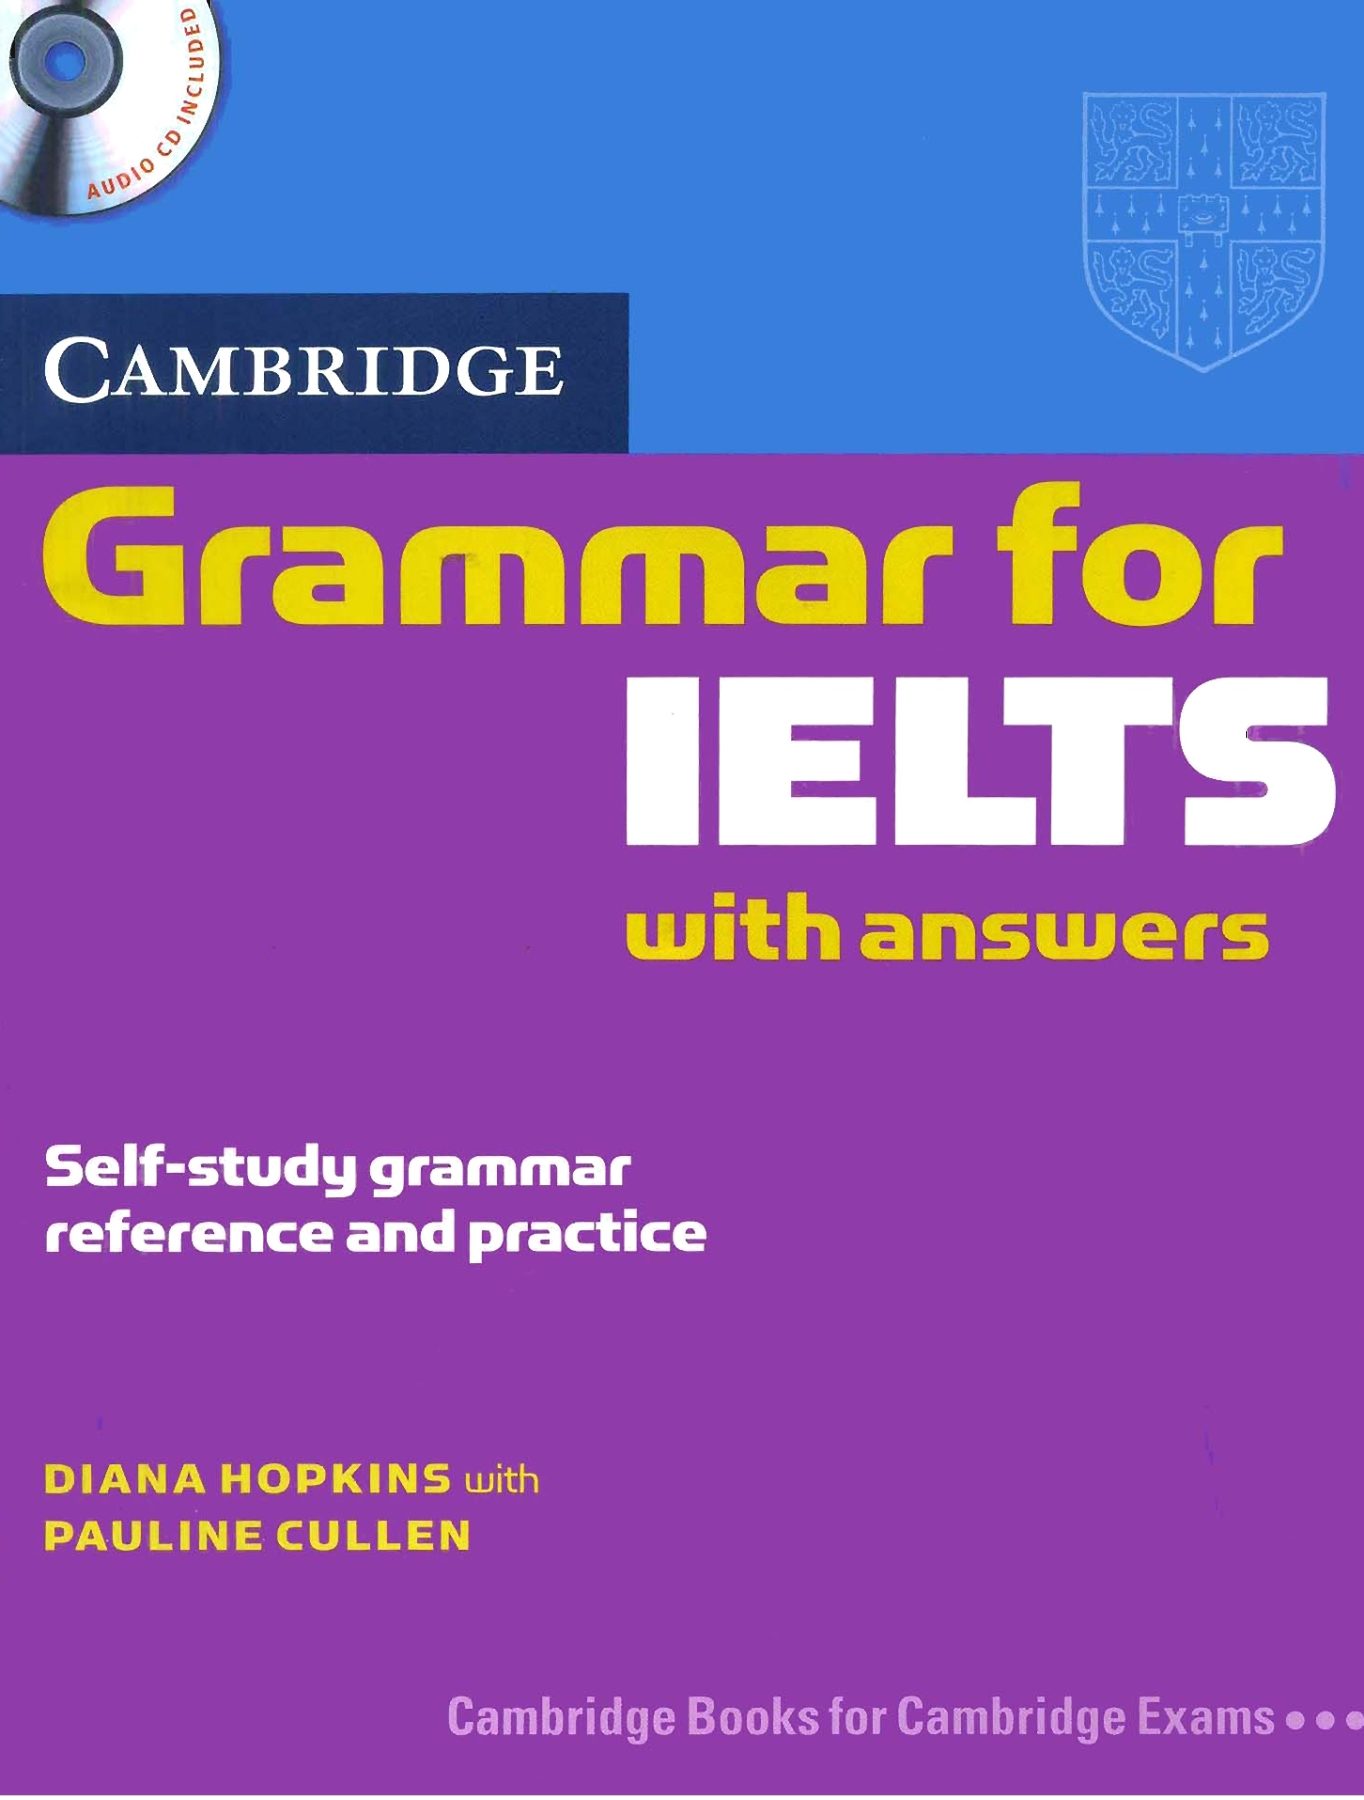 Cambridge Grammar For IELTS With Answers Pdf Free Download 